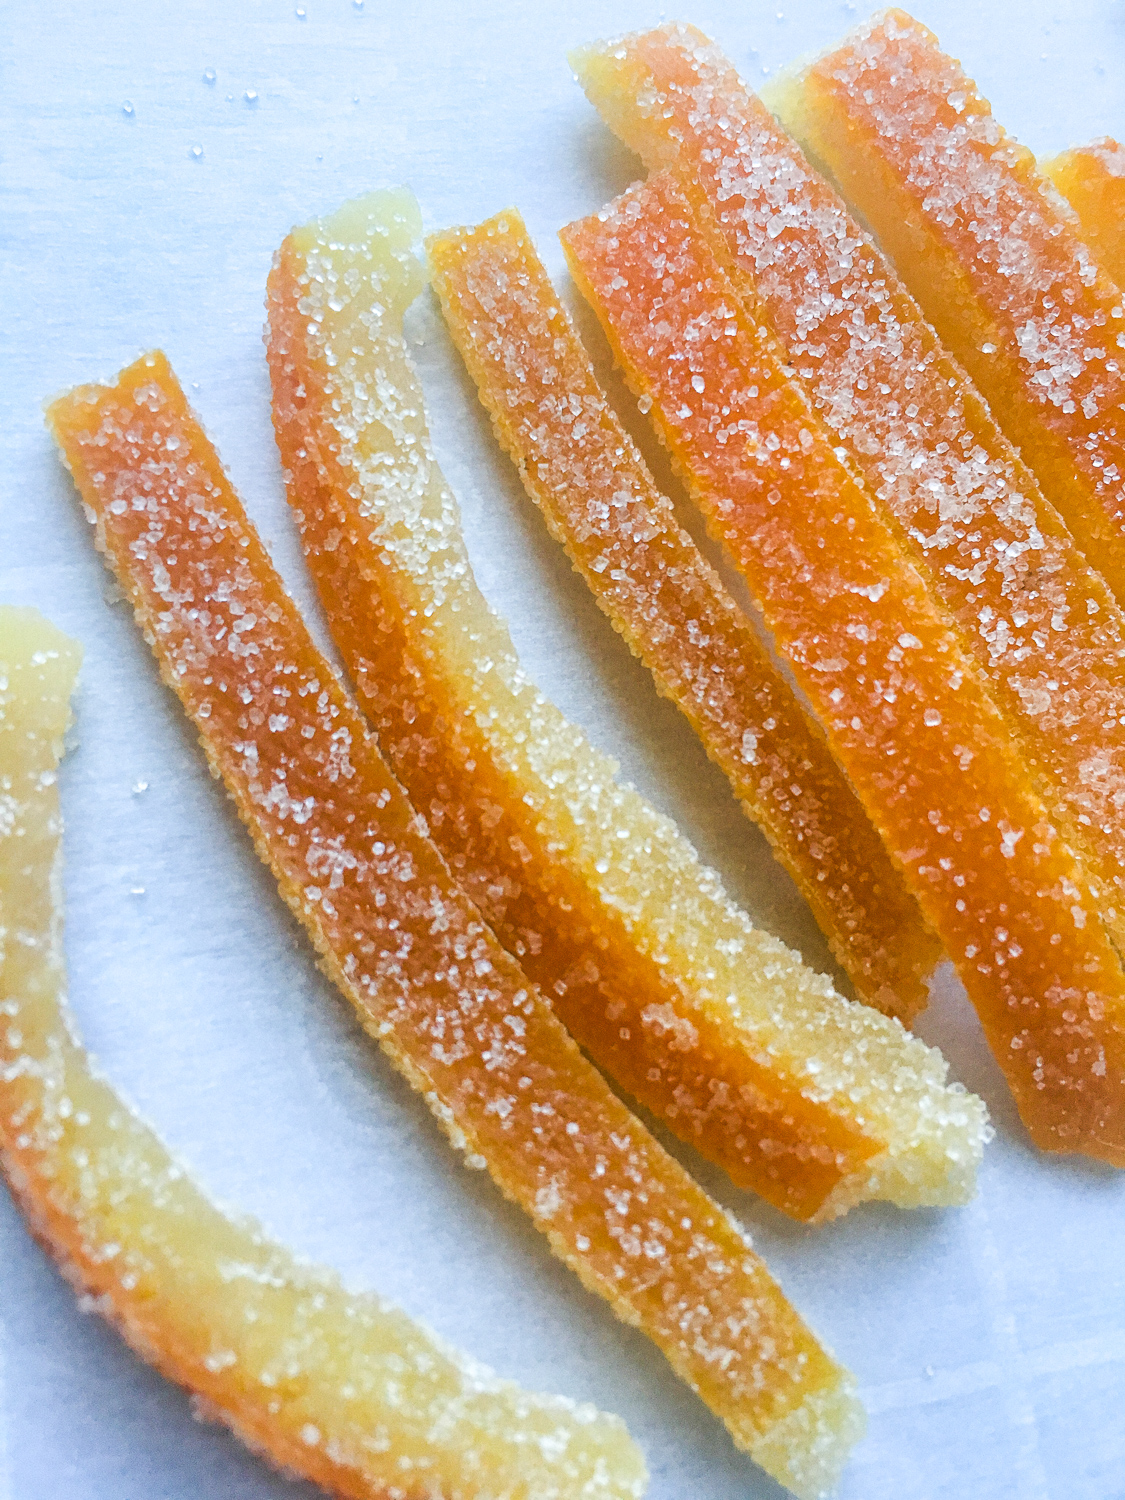 A delicious and easy way to make homemade candied orange peels. Perfect for snacking, using as a gorgeous garnish, or using in other recipes!